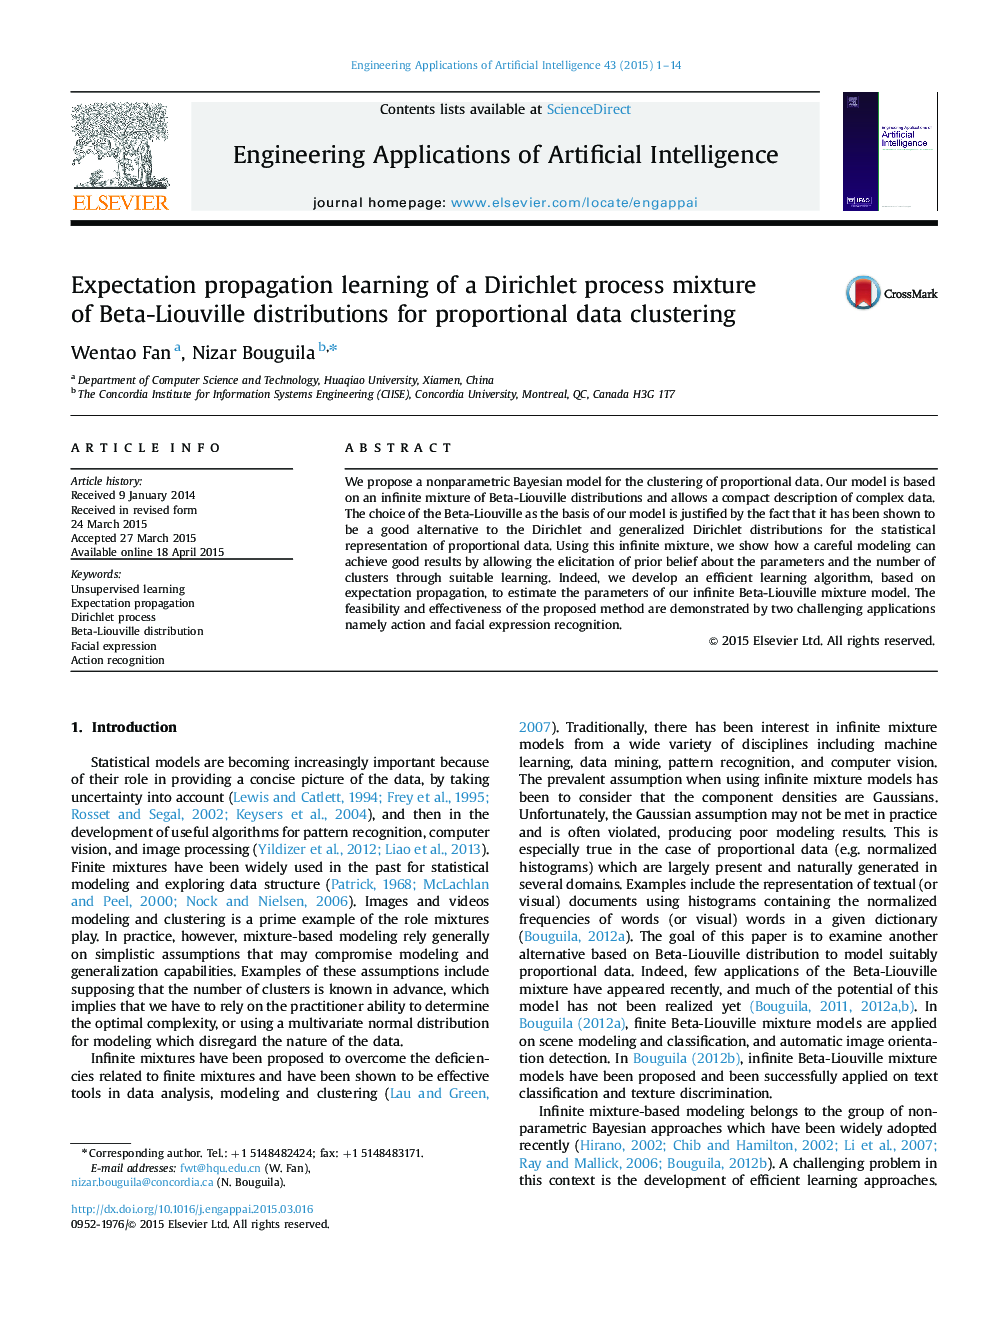 Expectation propagation learning of a Dirichlet process mixture of Beta-Liouville distributions for proportional data clustering